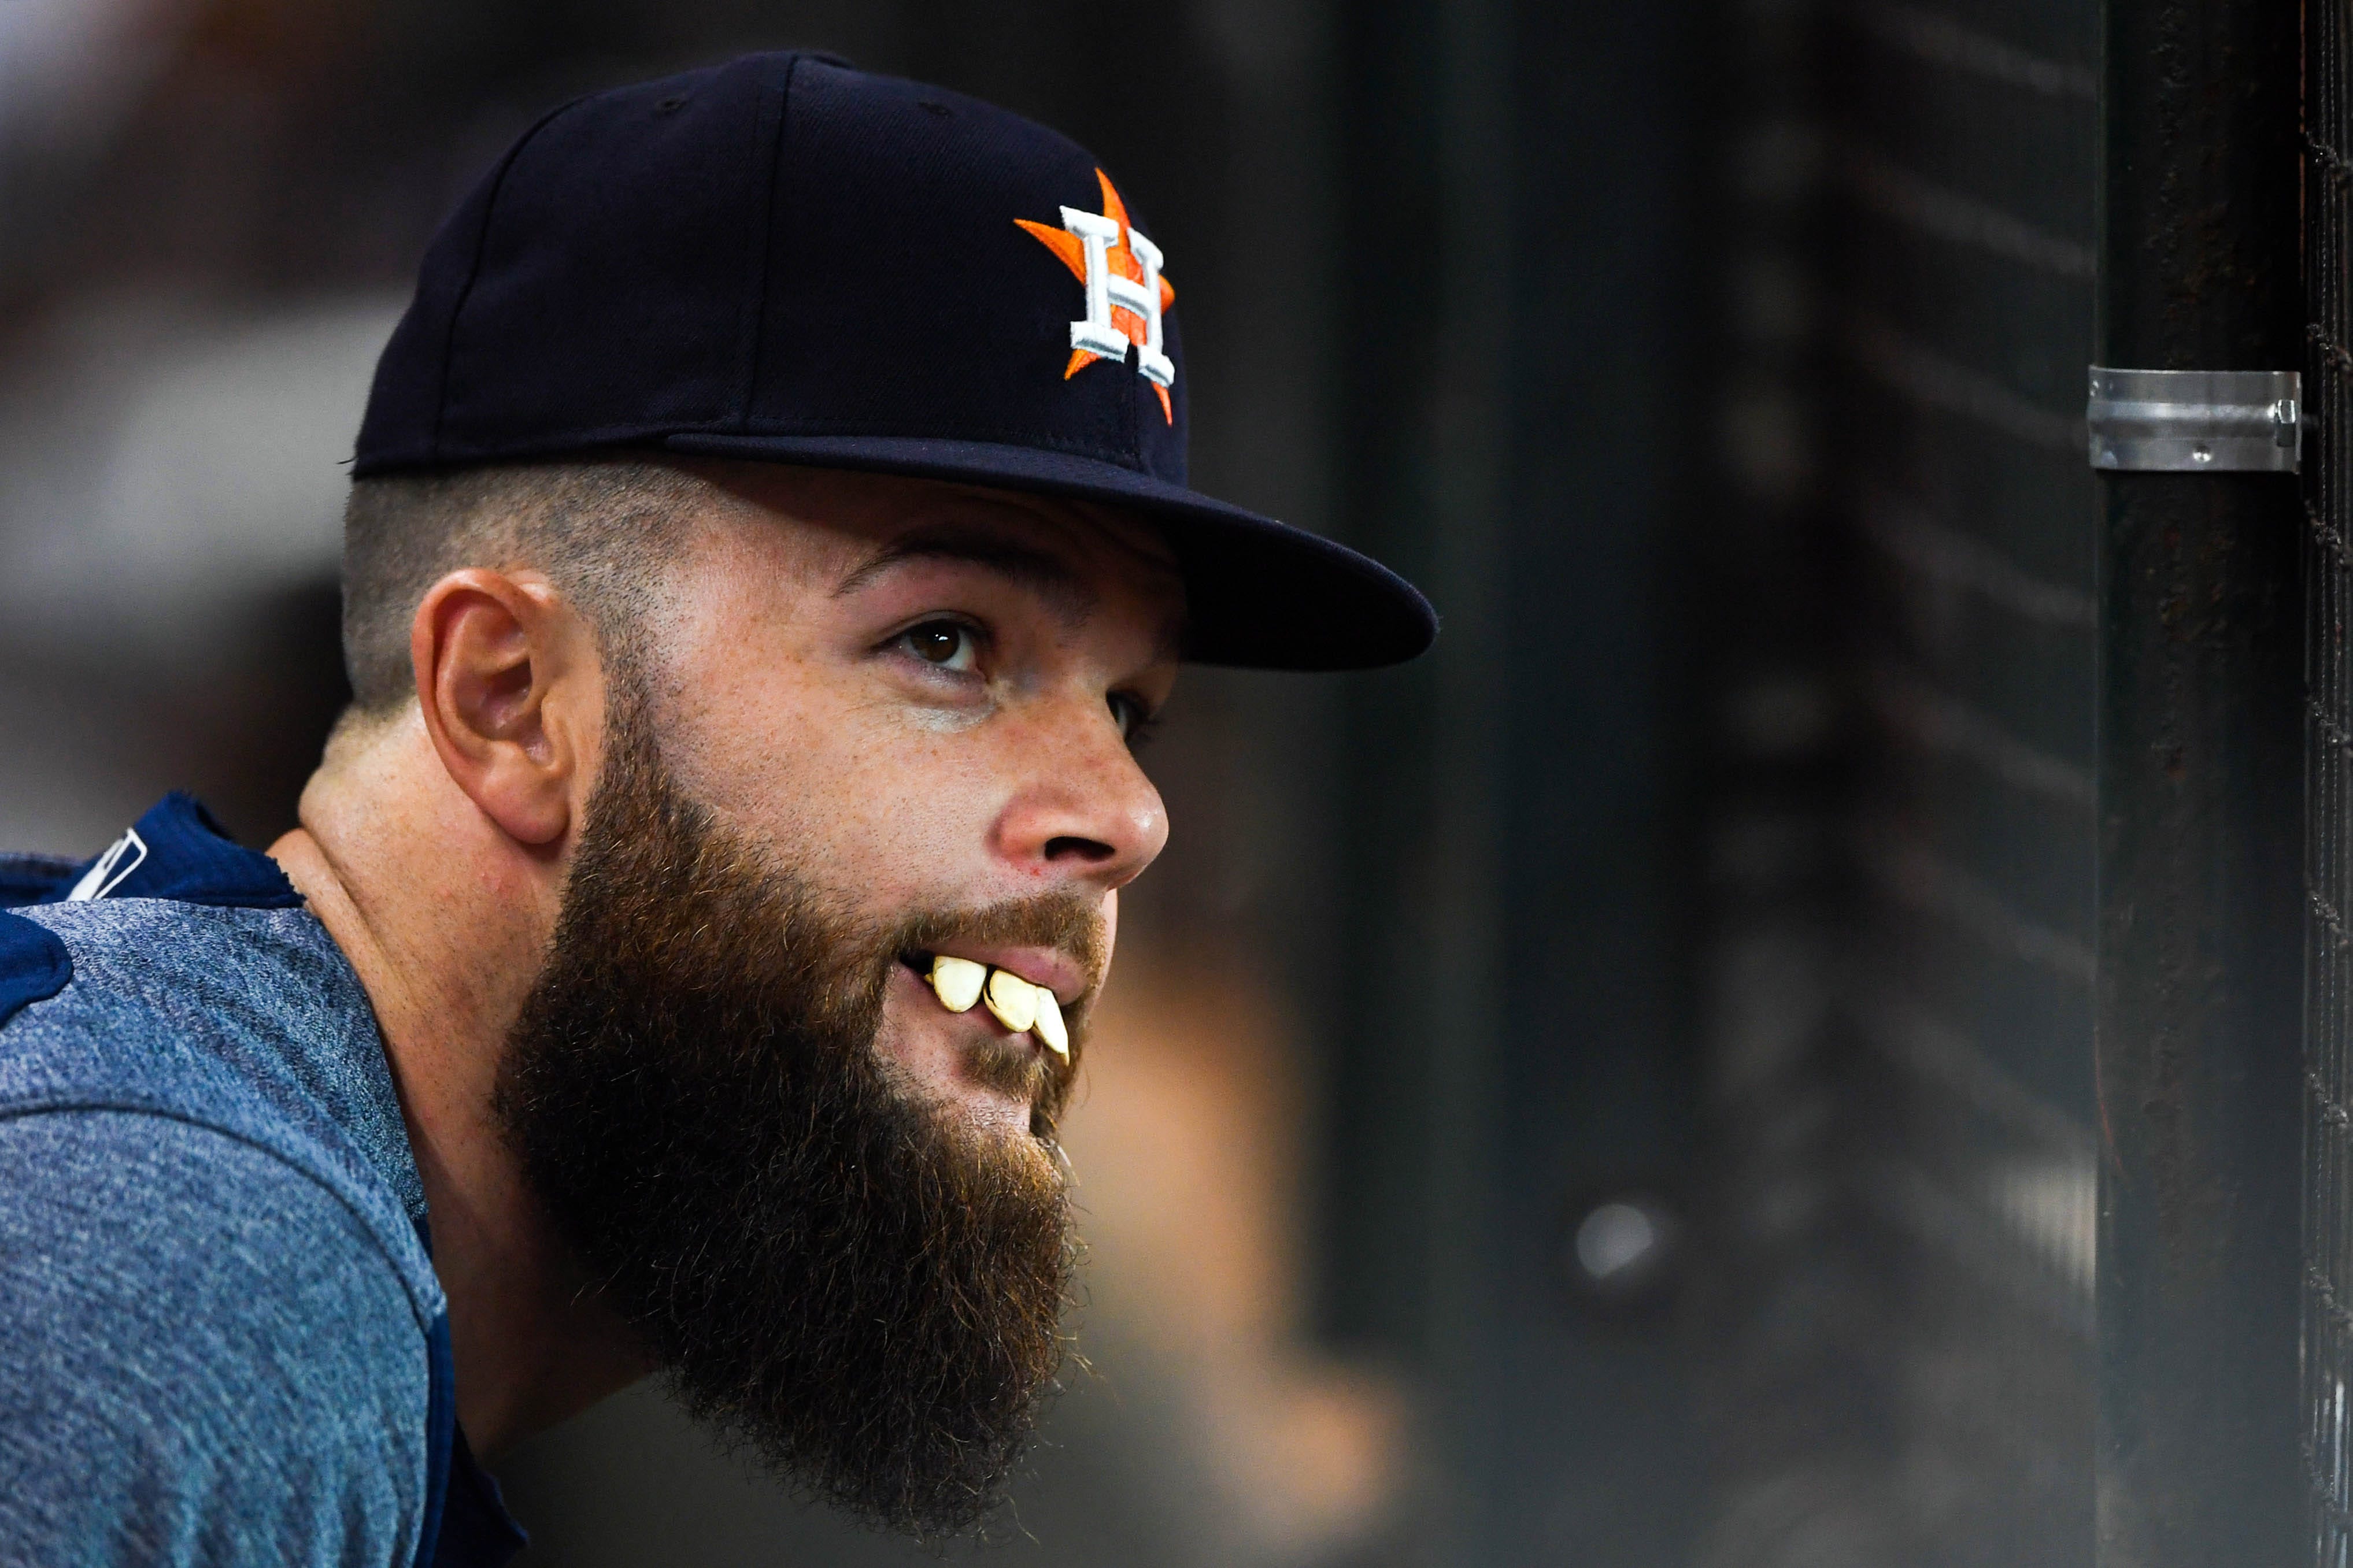 Houston Astros starting pitcher Dallas Keuchel makes teeth out of pumpkin seeds in the dugout during the third inning against the New York Yankees at Minute Maid Park in Houston.